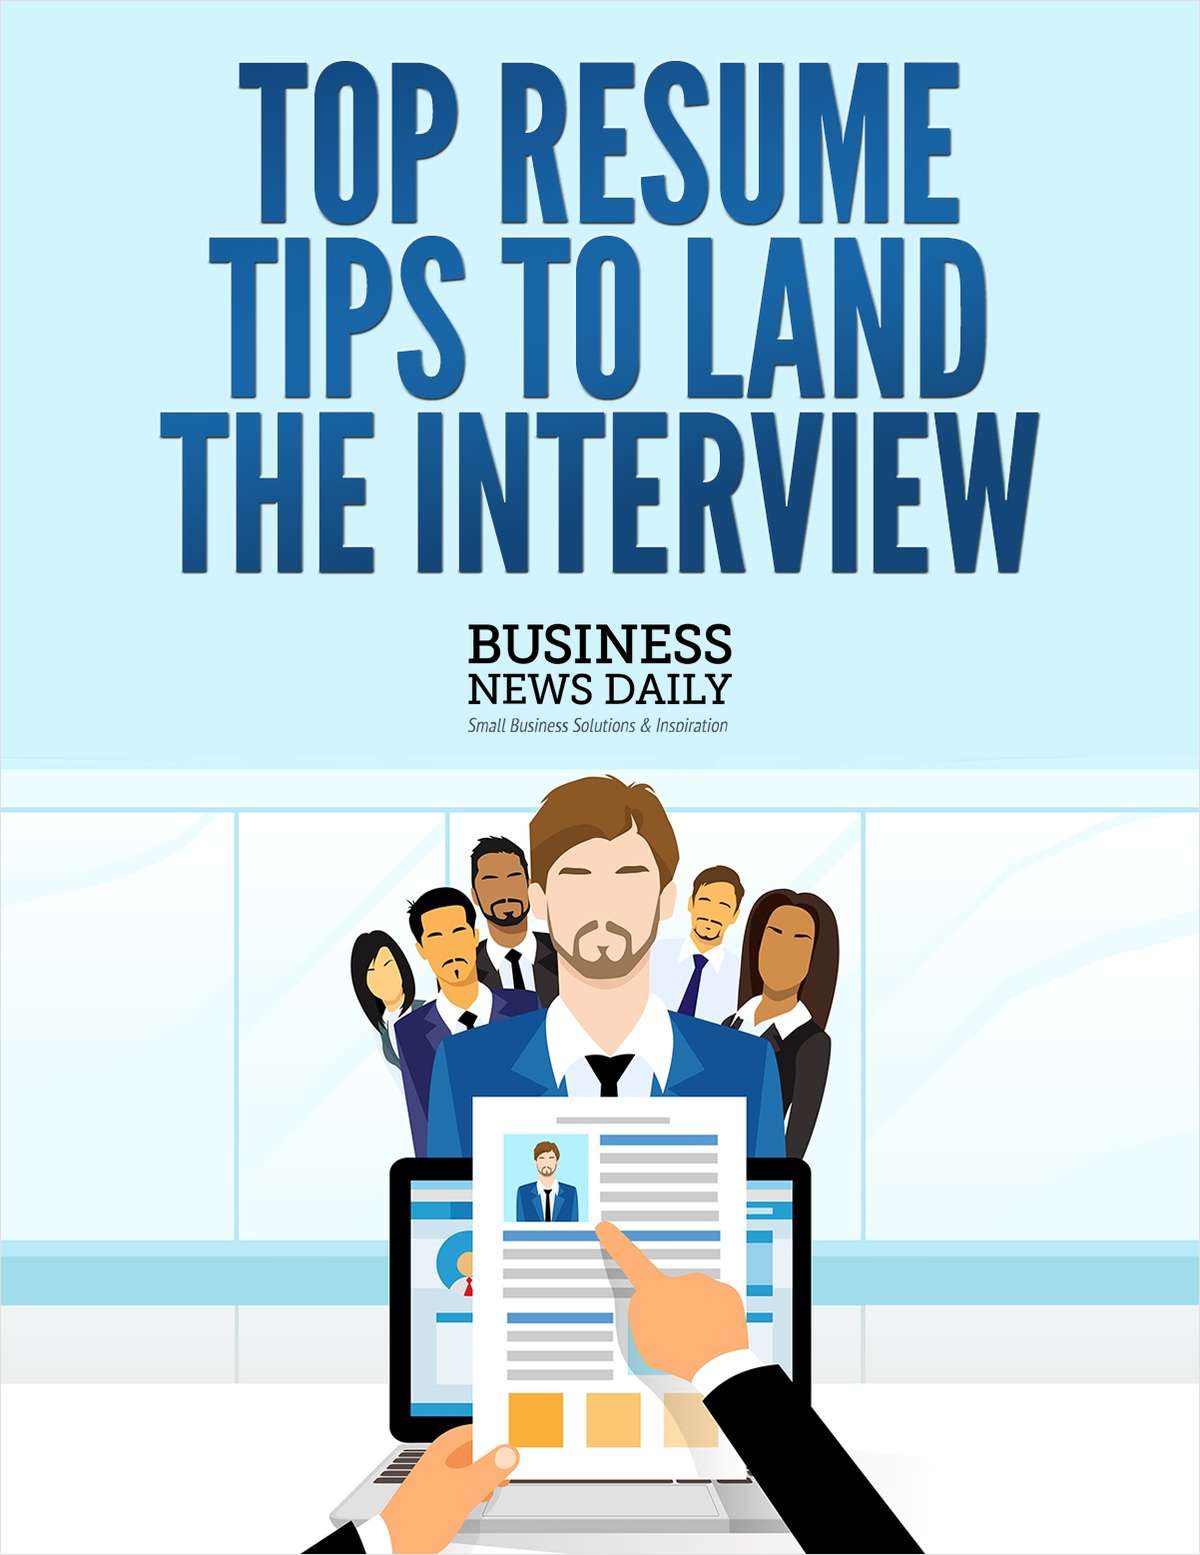 Top Resume Tips to Land the Interview